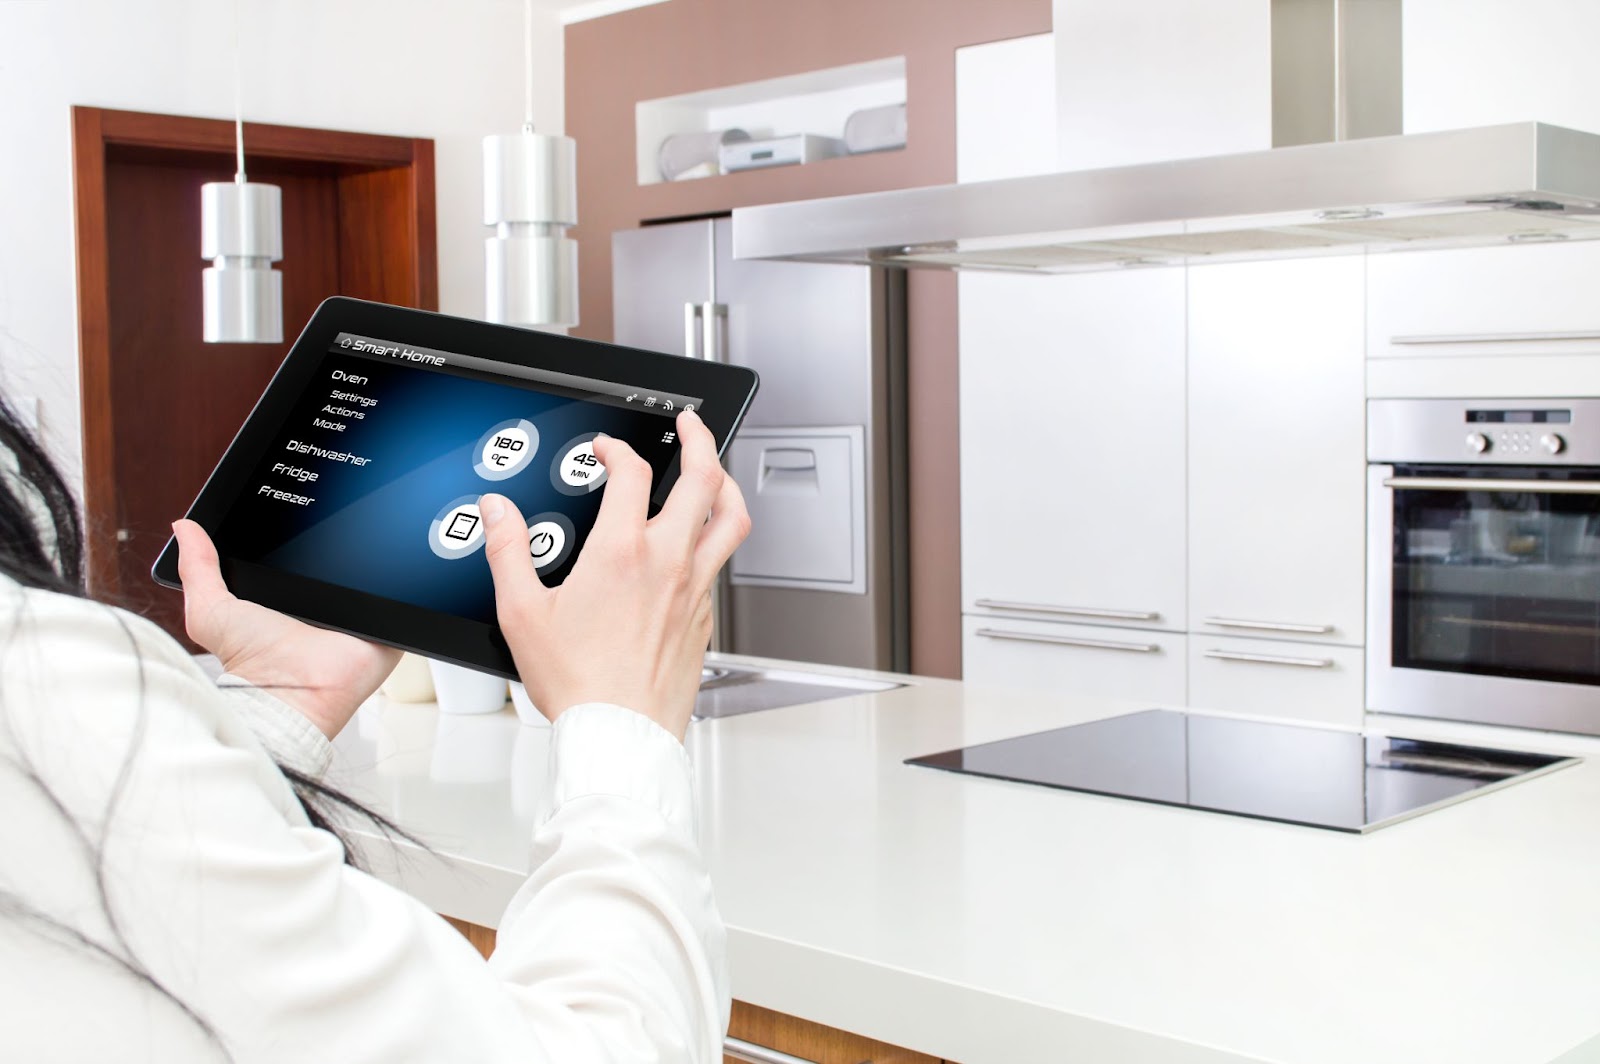 Smart kitchen controlled by tablet smart home hub.